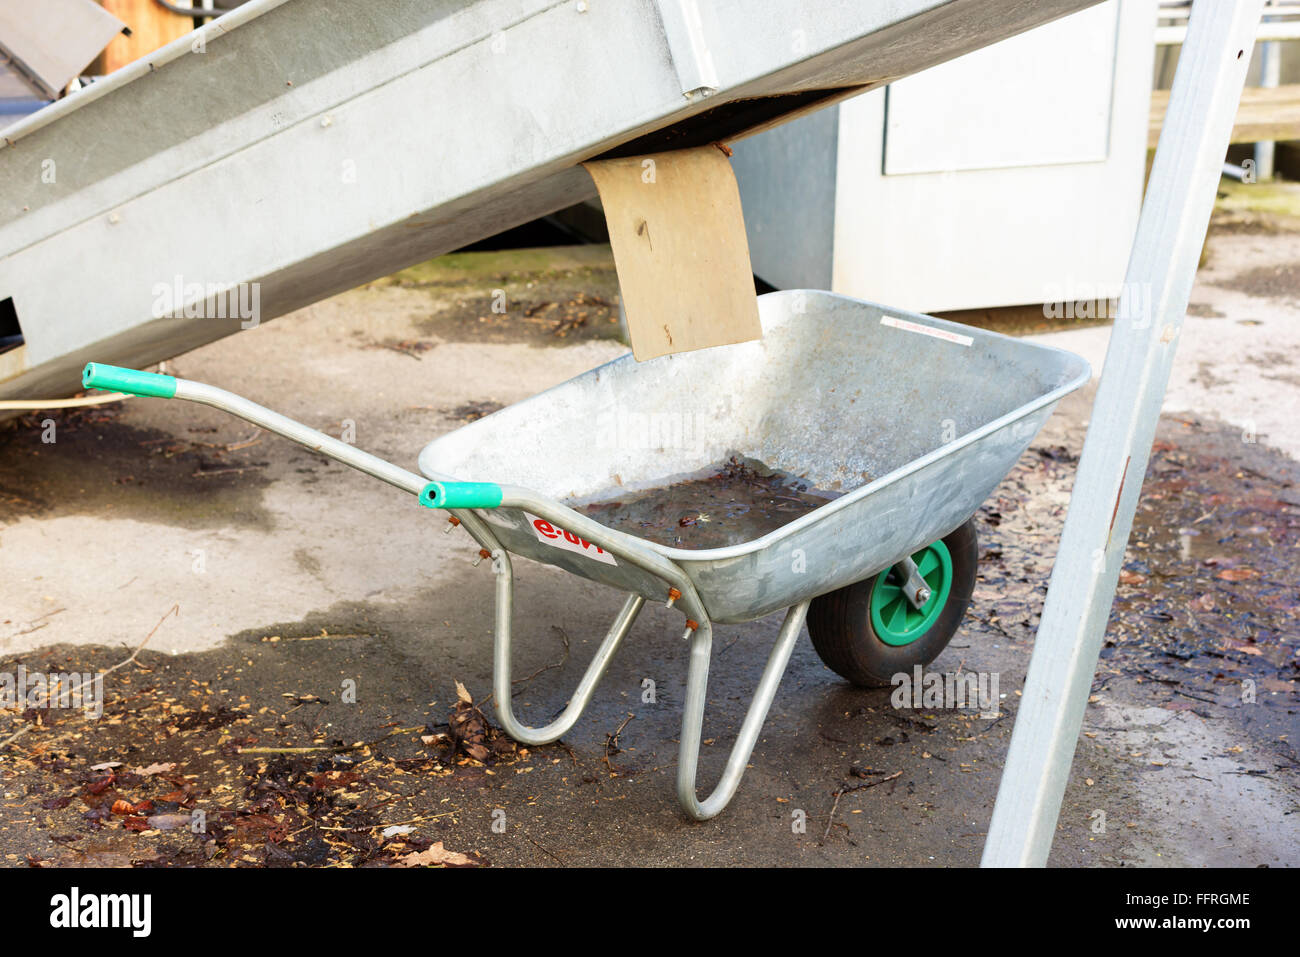 Kallinge, Sweden - February 07, 2016: An empty metal wheelbarrow stand under a conveyor belt waiting to get filled up. Some kind Stock Photo